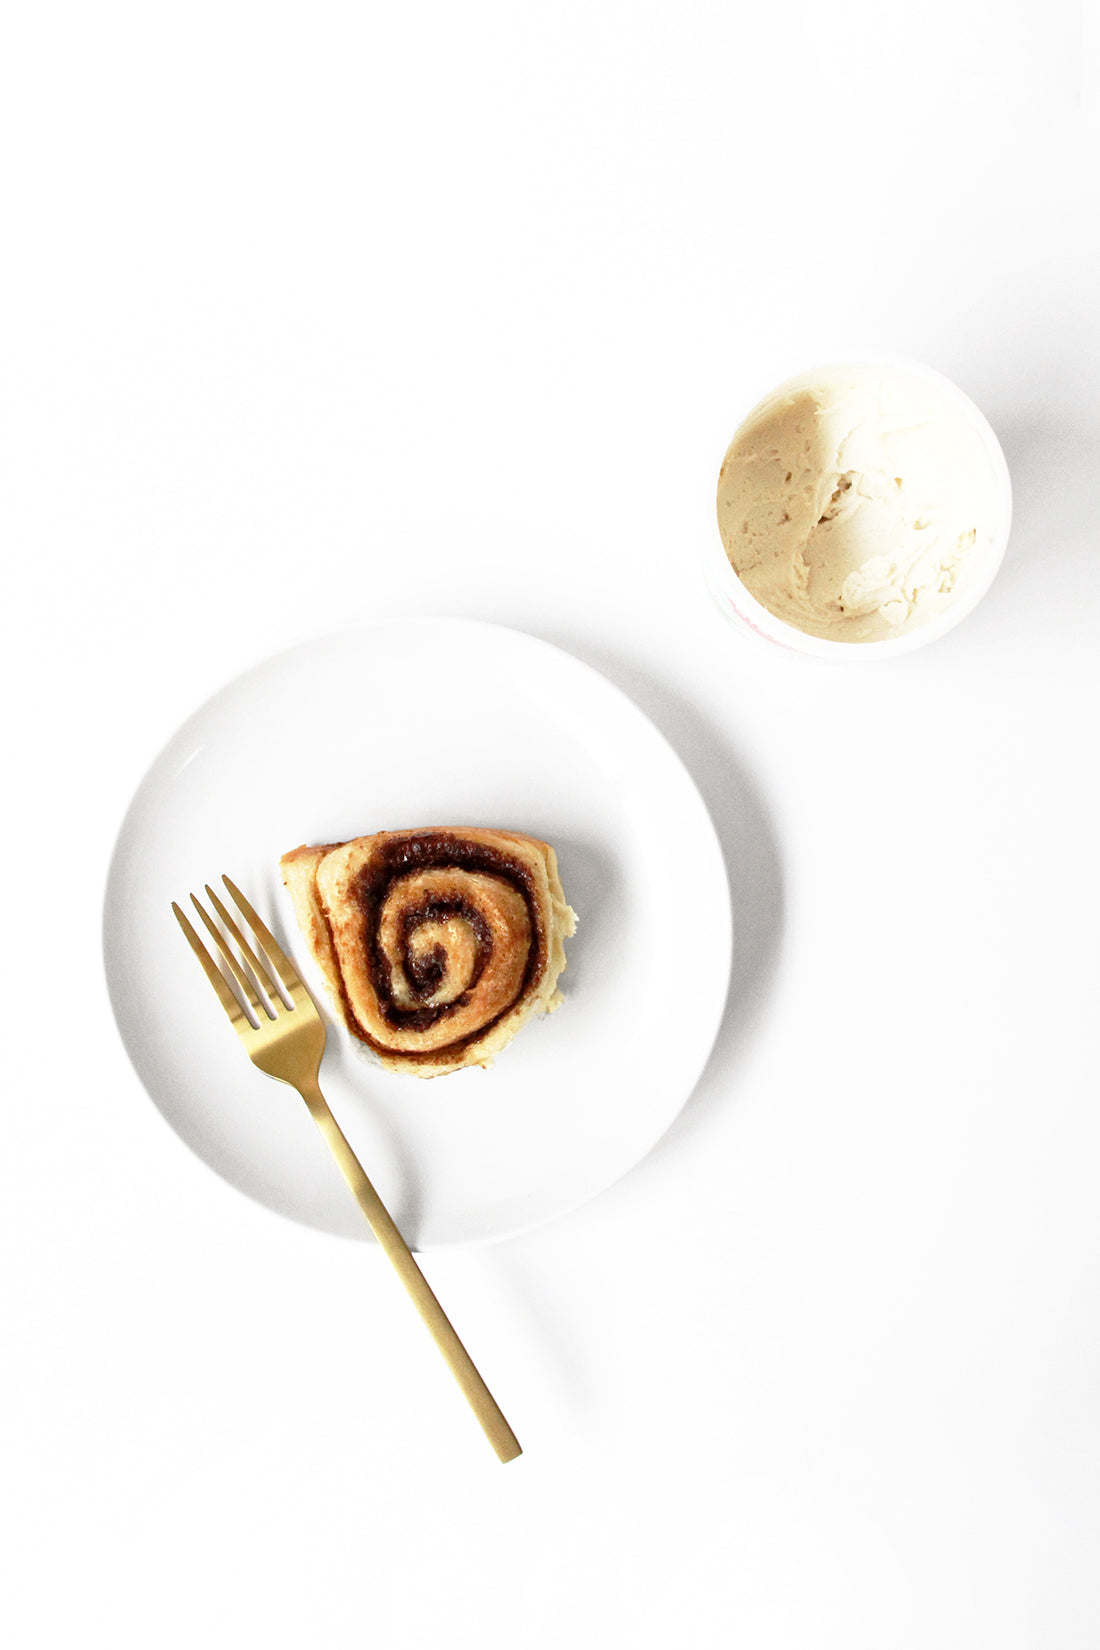 Image from above of a plate with Miss Jones Baking Co Cake Mix Cinnamon Roll next to a container of frosting